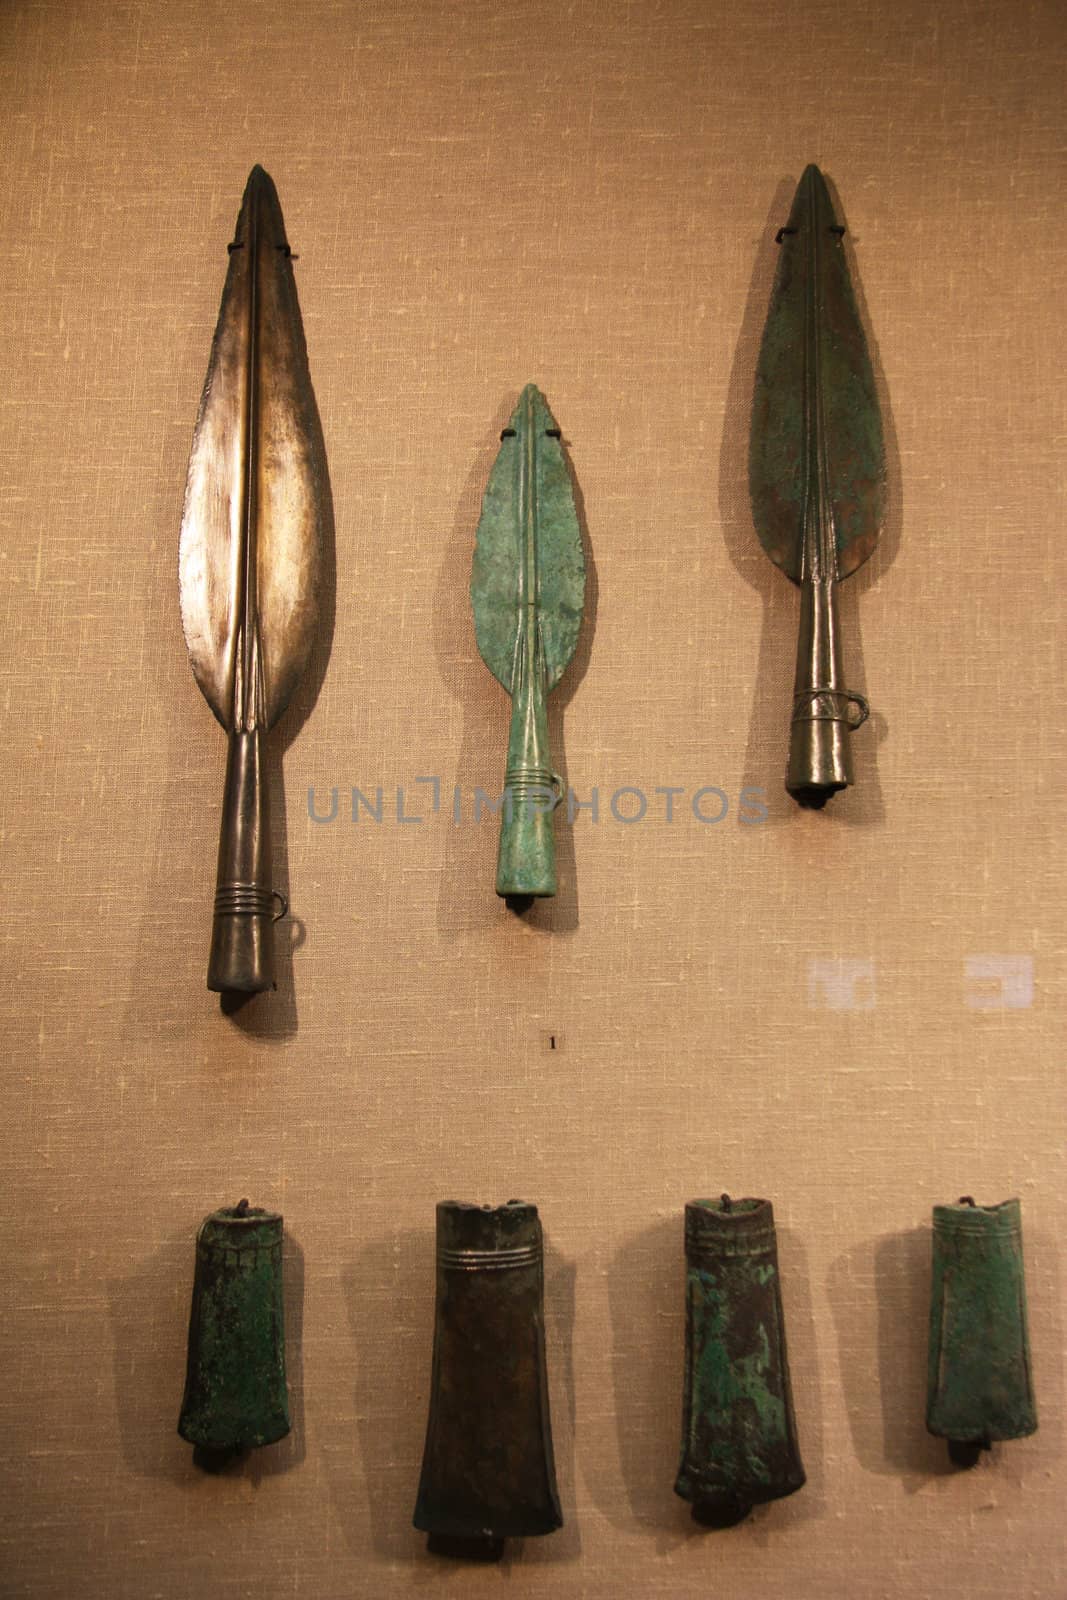 Ancient bronze spears in a museum